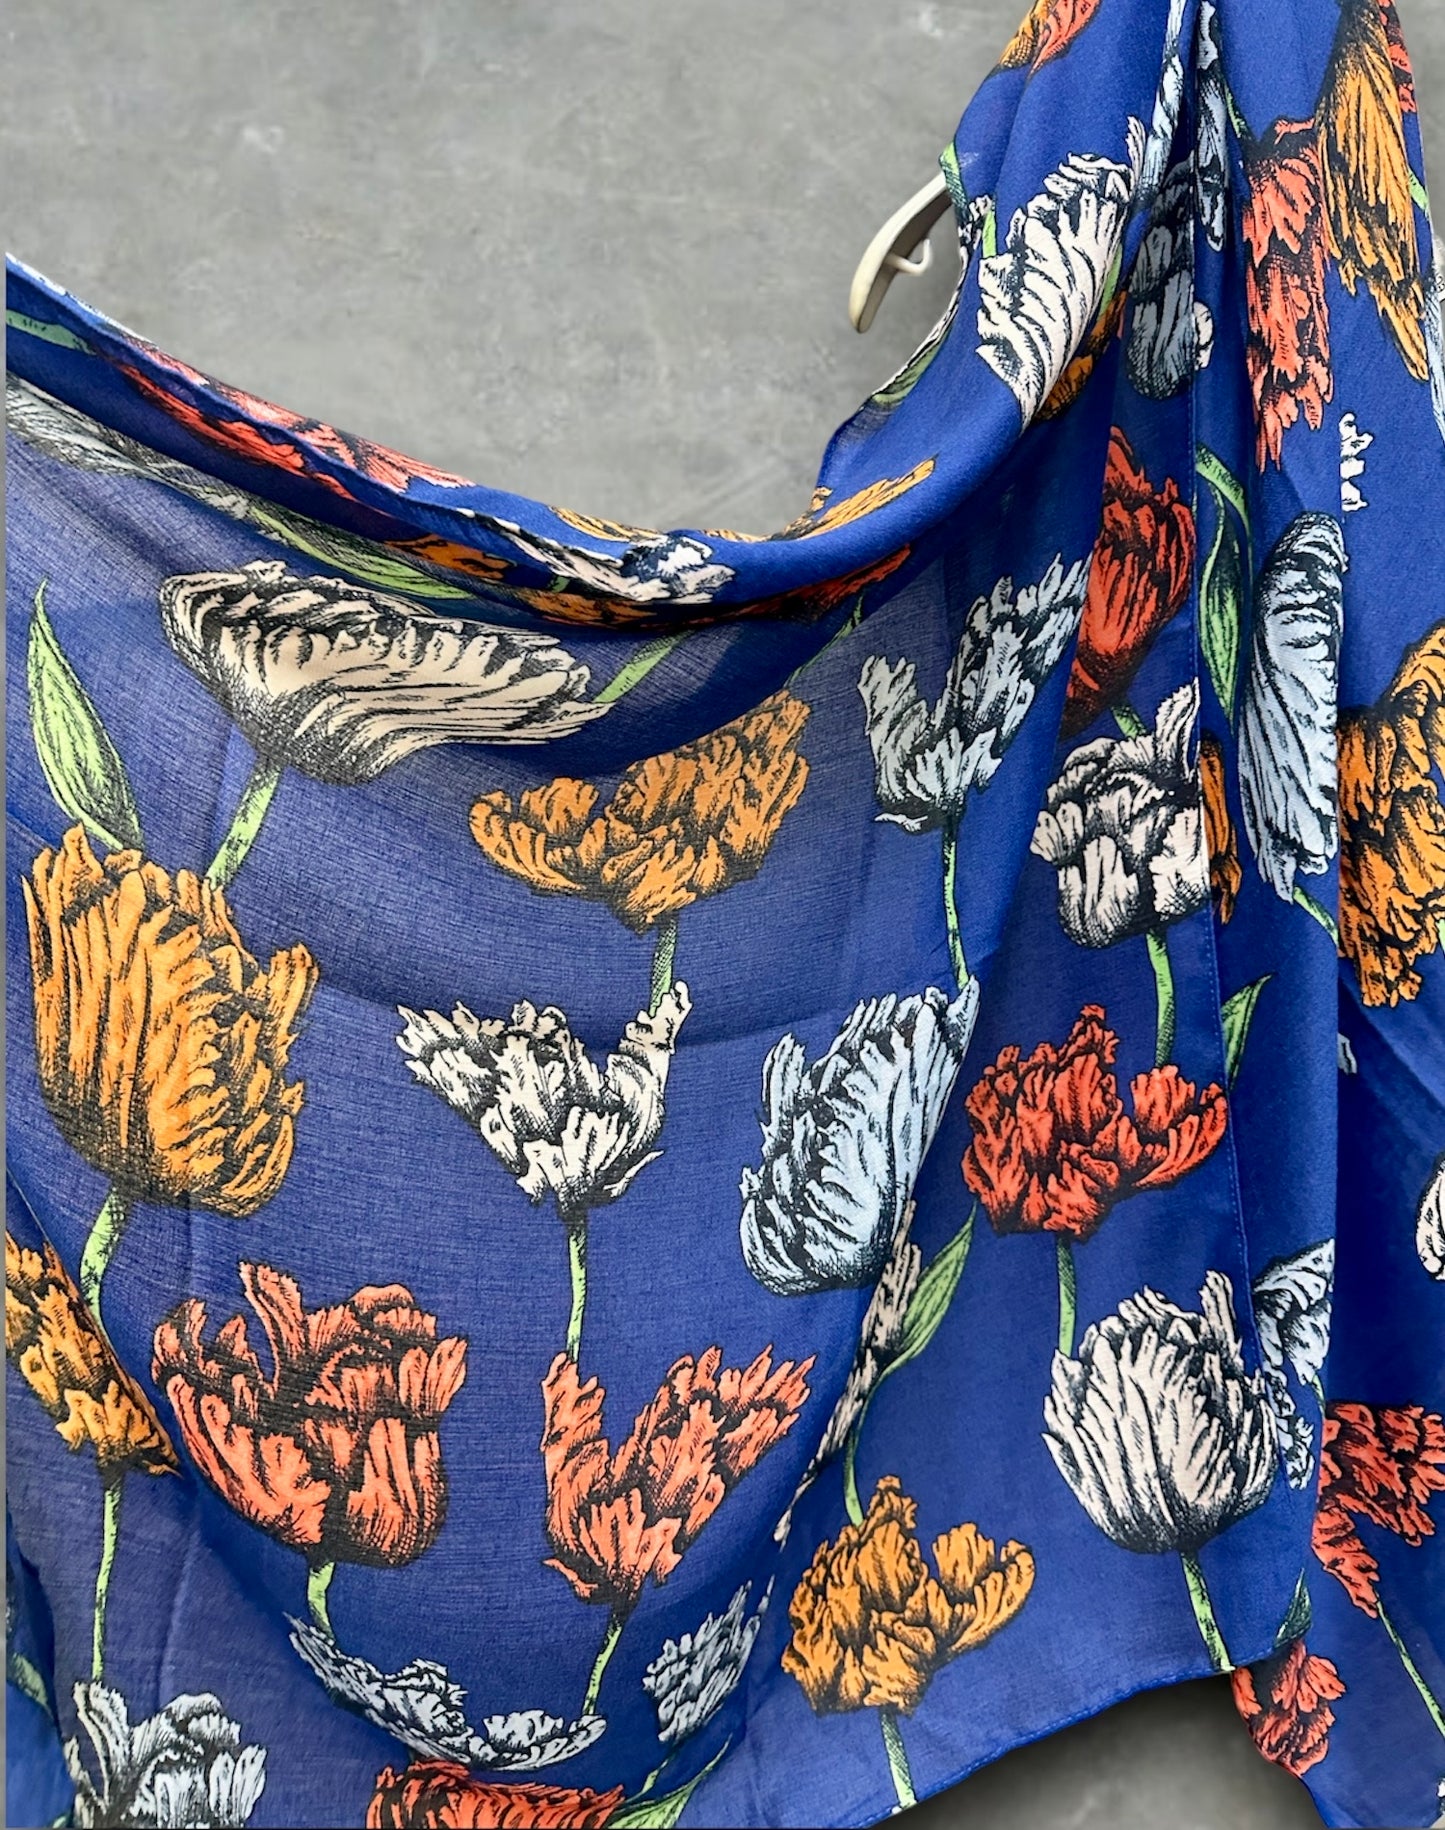 Blue Cotton Scarf with Eco-Friendly Sketched Parrot Tulips Flower Design – A Sustainable Gift for Mom and Her, Ideal for Birthday and Christmas Celebrations